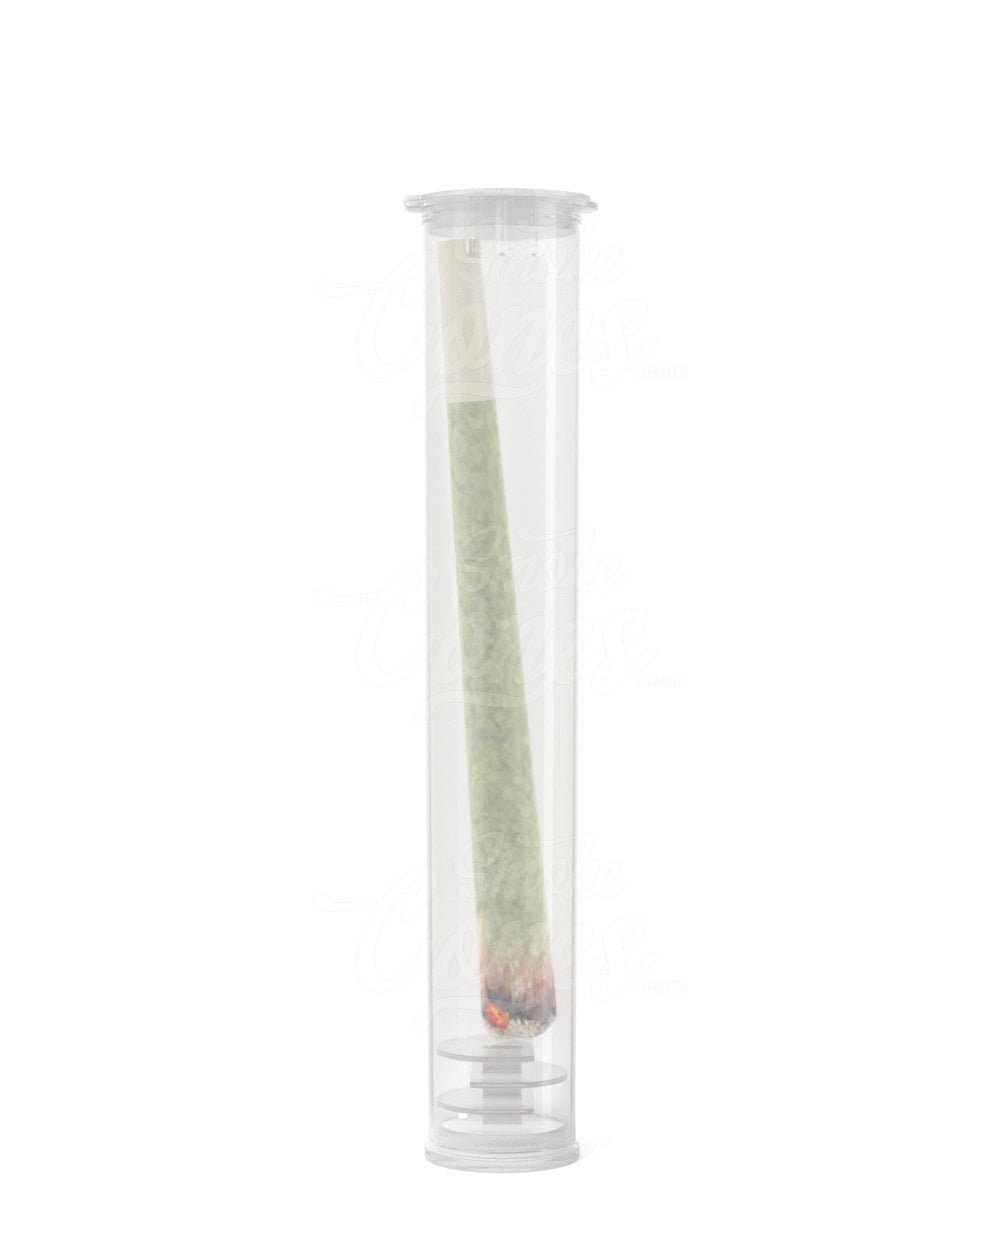 Blunt Tubes, Joint Tubes, Preroll Tubes